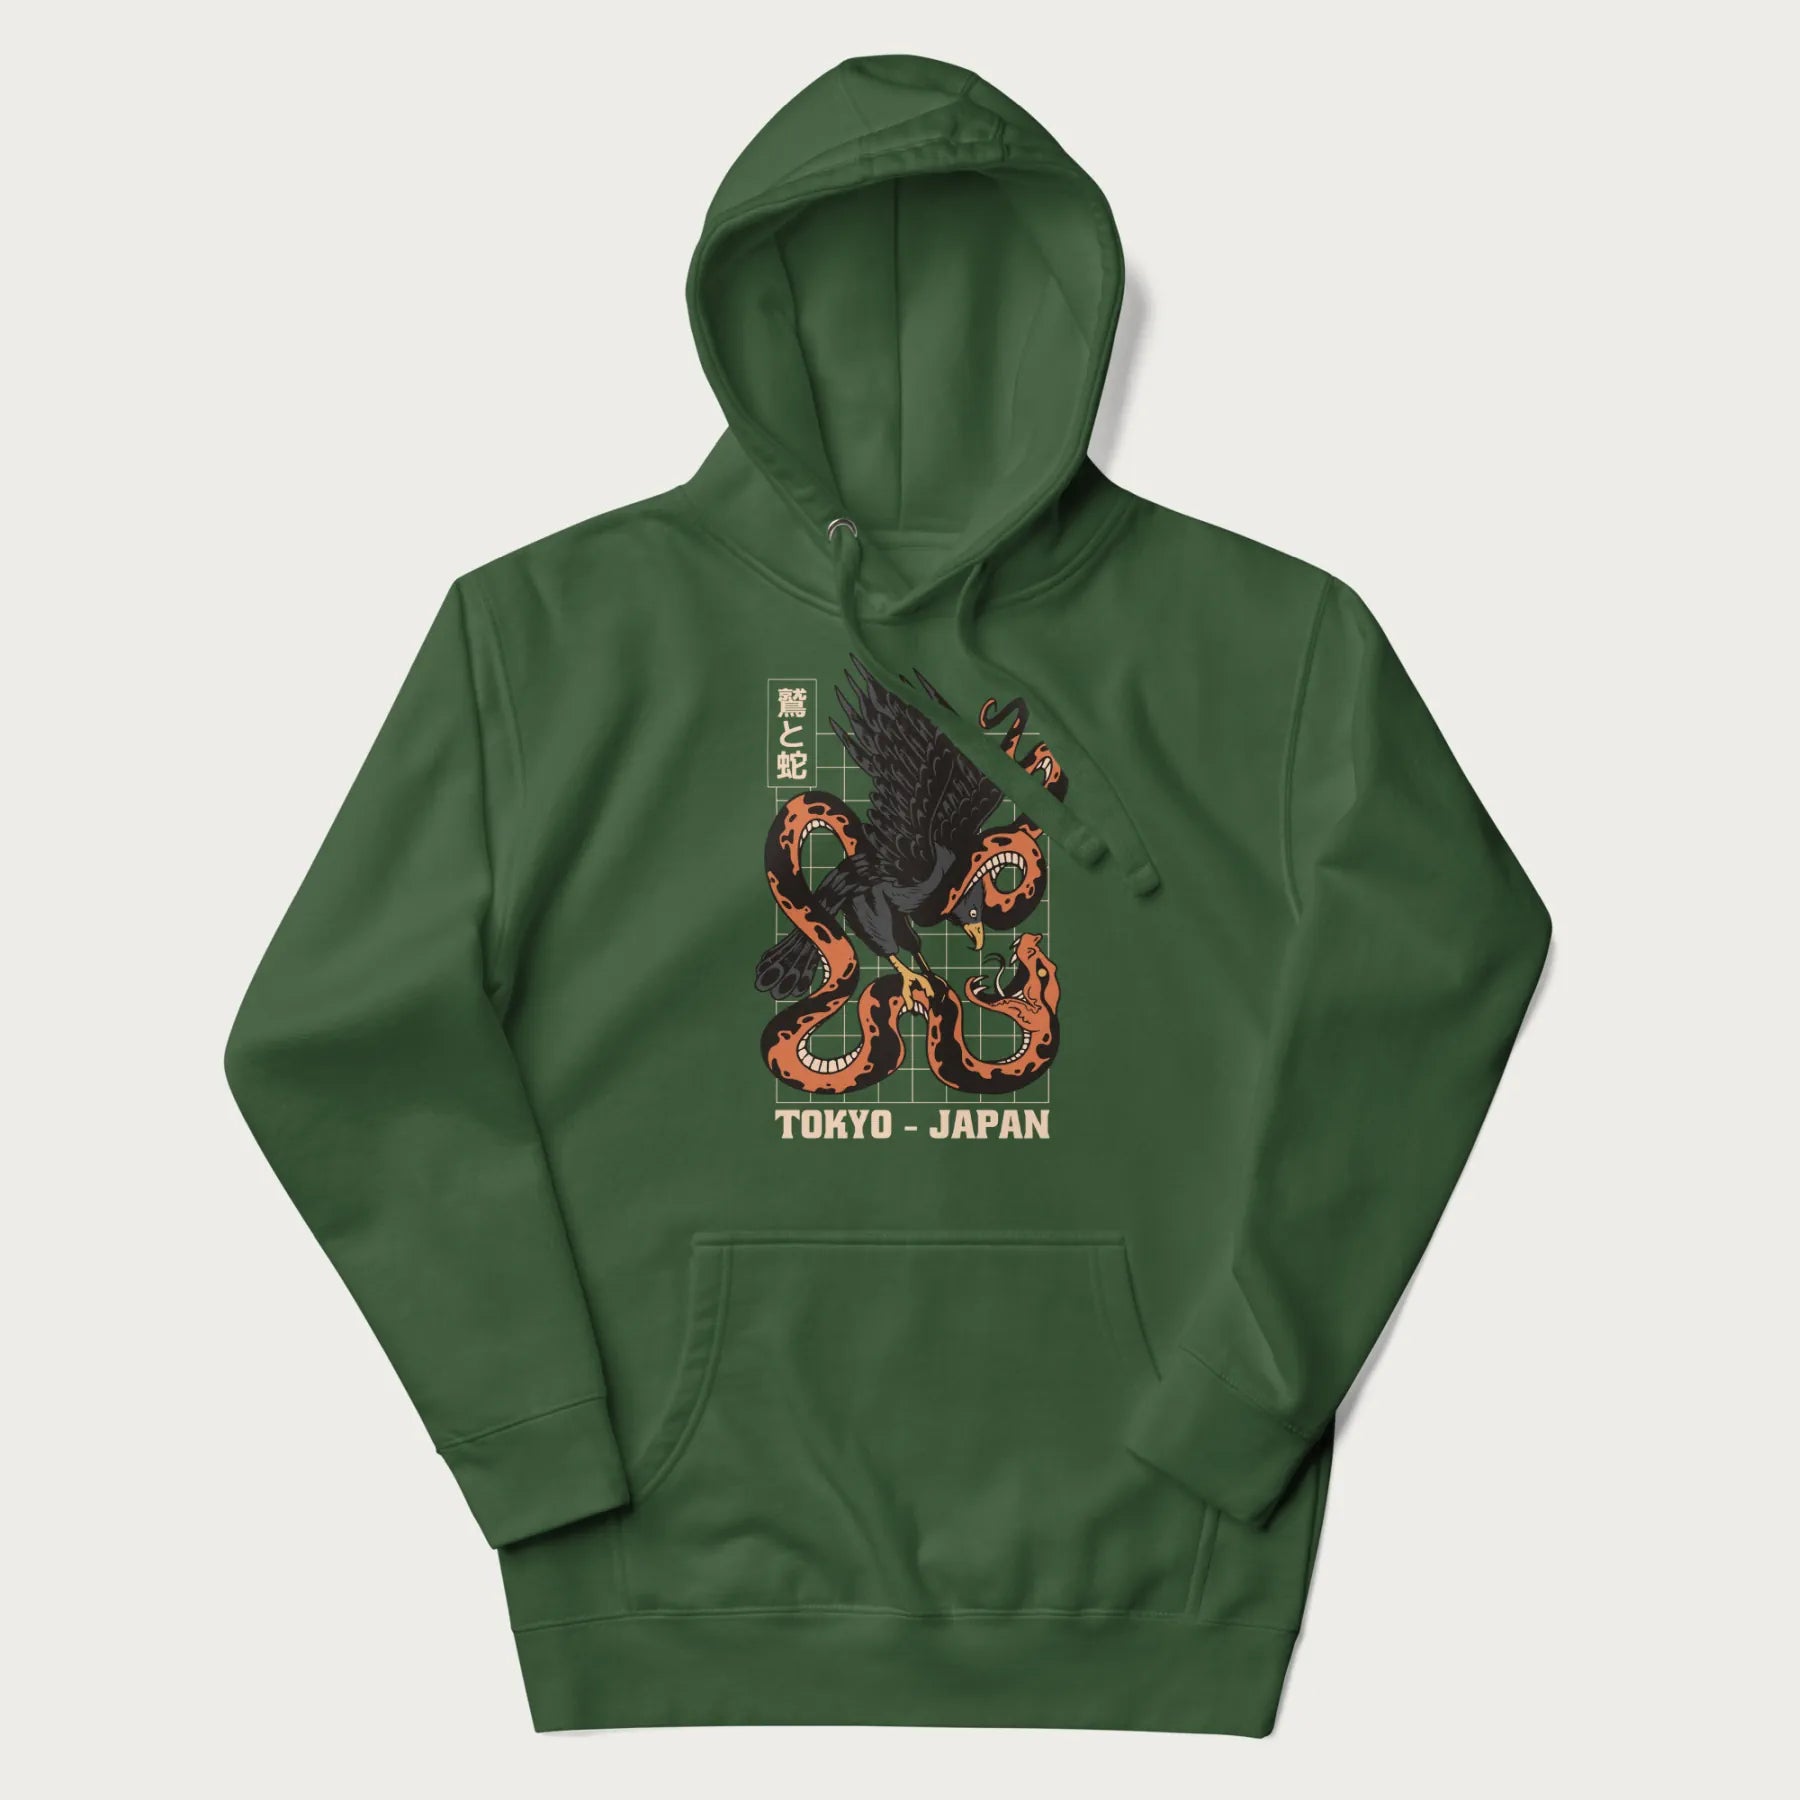 Forest green hoodie with Japanese text and a graphic of an eagle battling a snake, with the text 'Tokyo Japan' underneath.